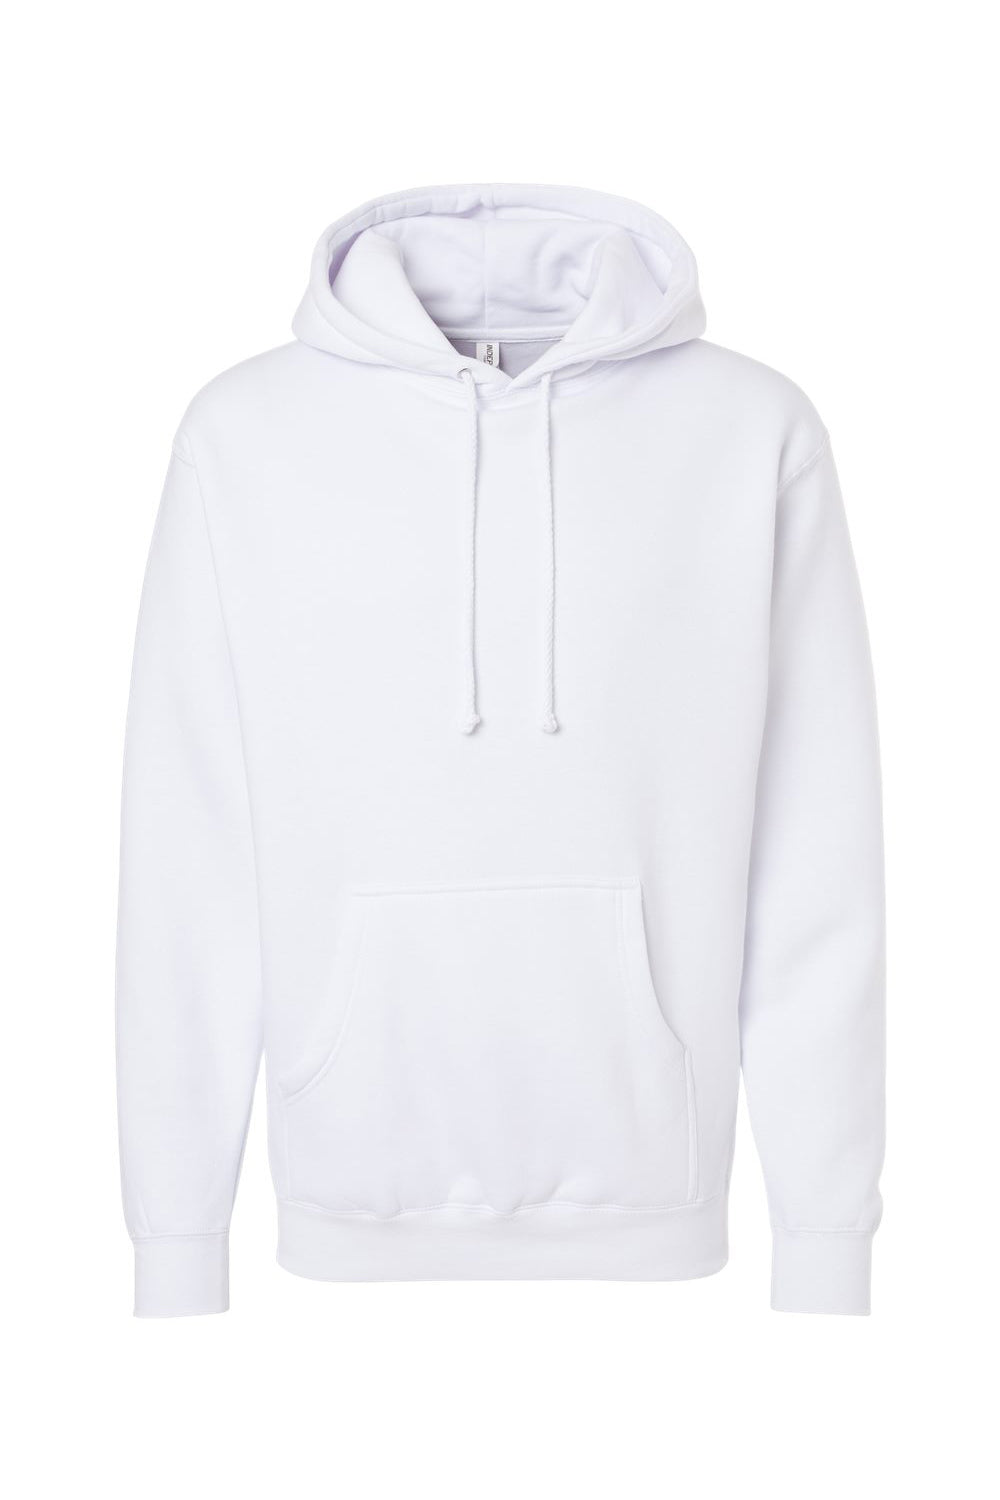 Independent Trading Co. IND4000 Mens Hooded Sweatshirt Hoodie White Flat Front